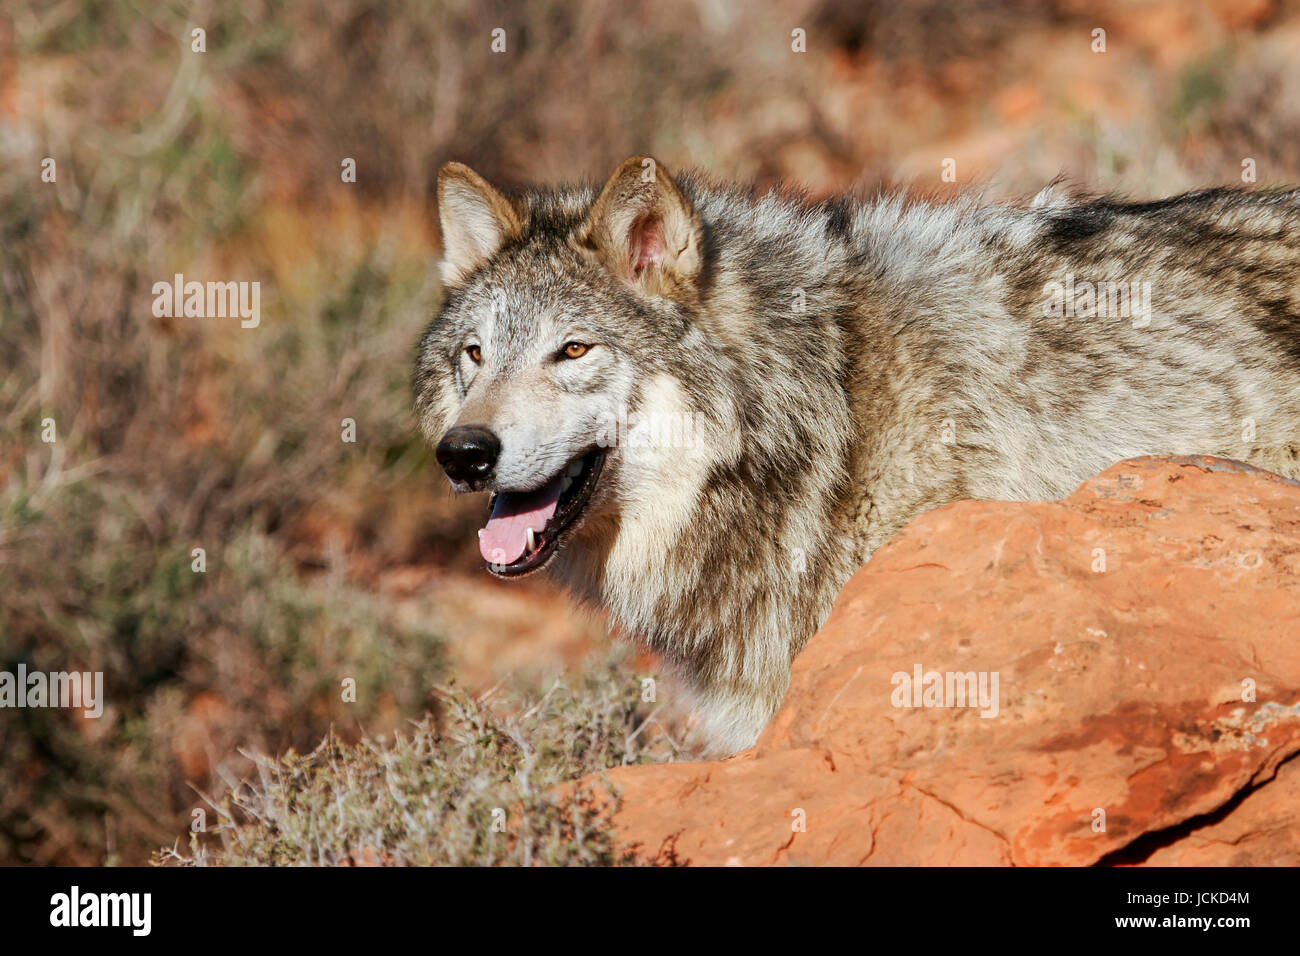 Portrait of Gray wolf (Canis lupus) in a desert Stock Photo